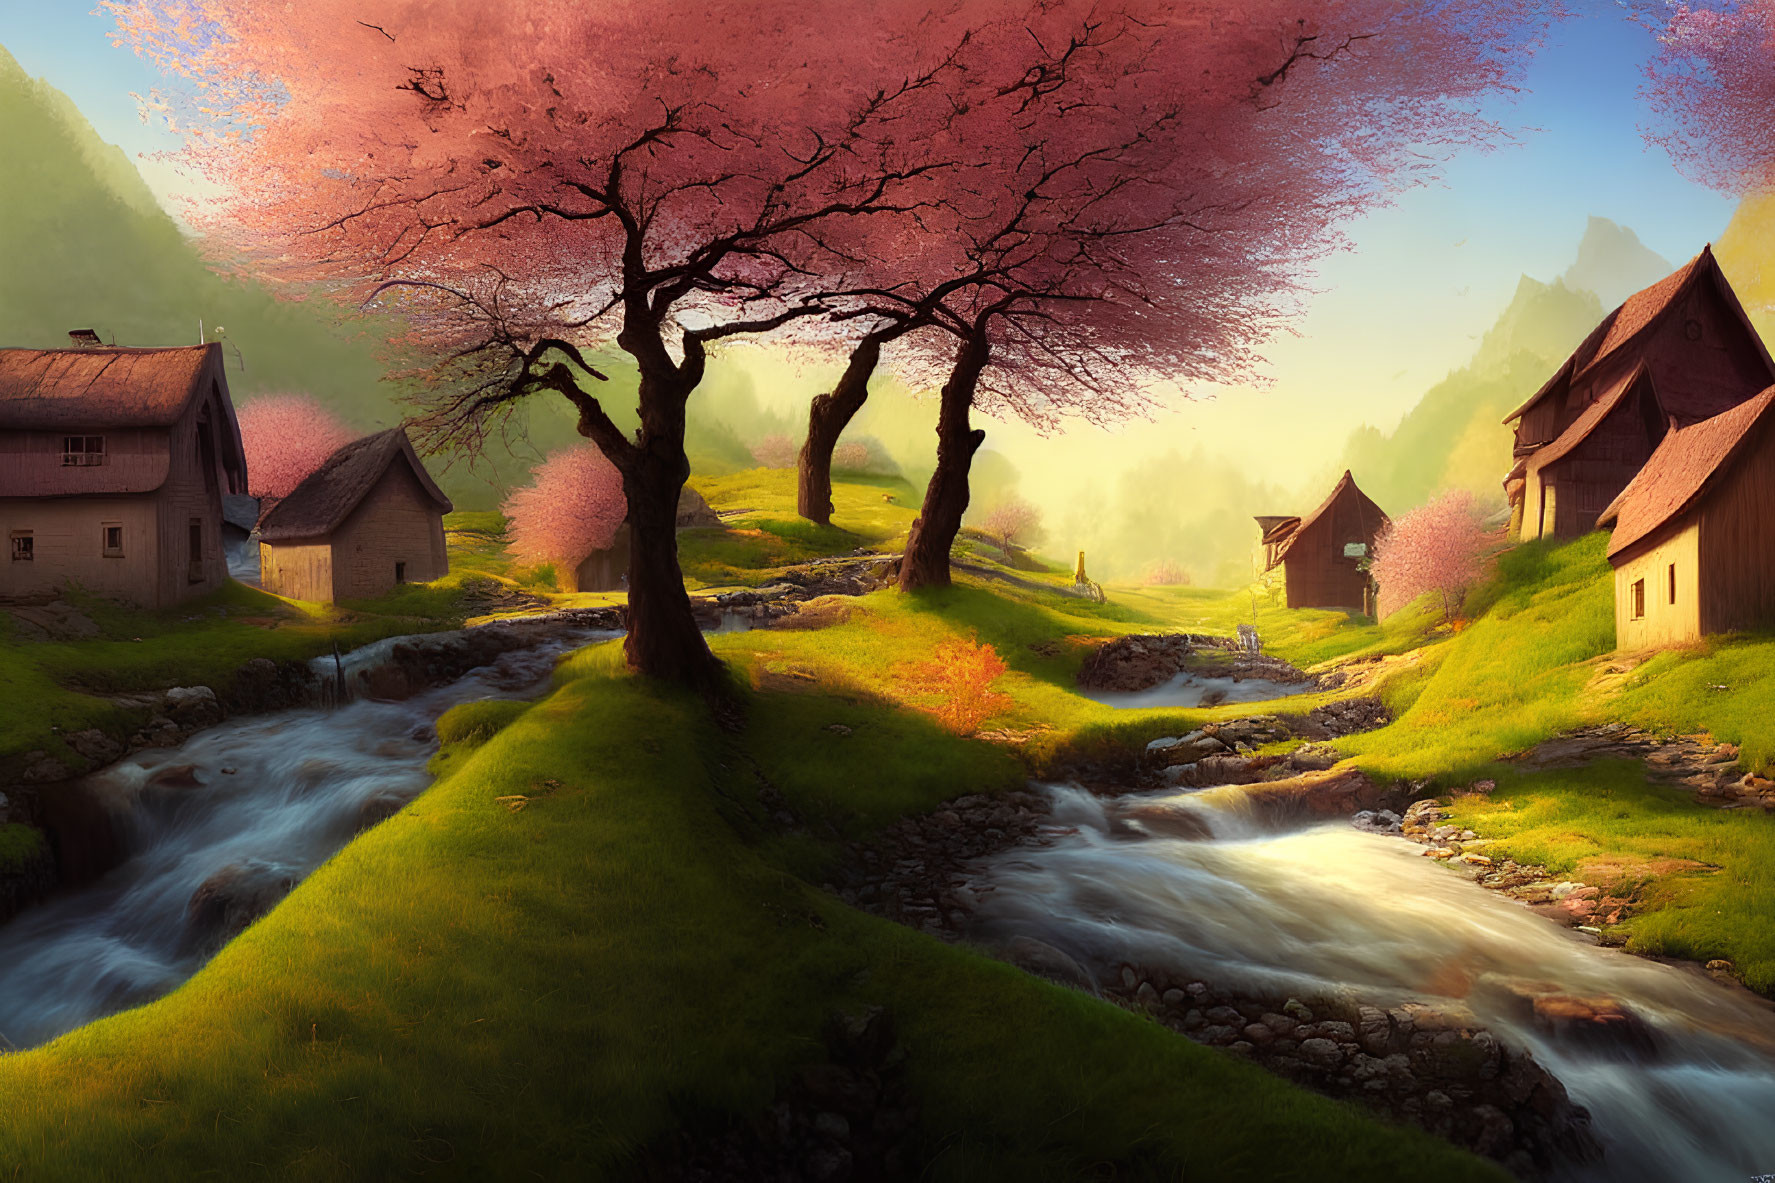 Tranquil landscape with brook, houses, greenery, and pink blossomed tree